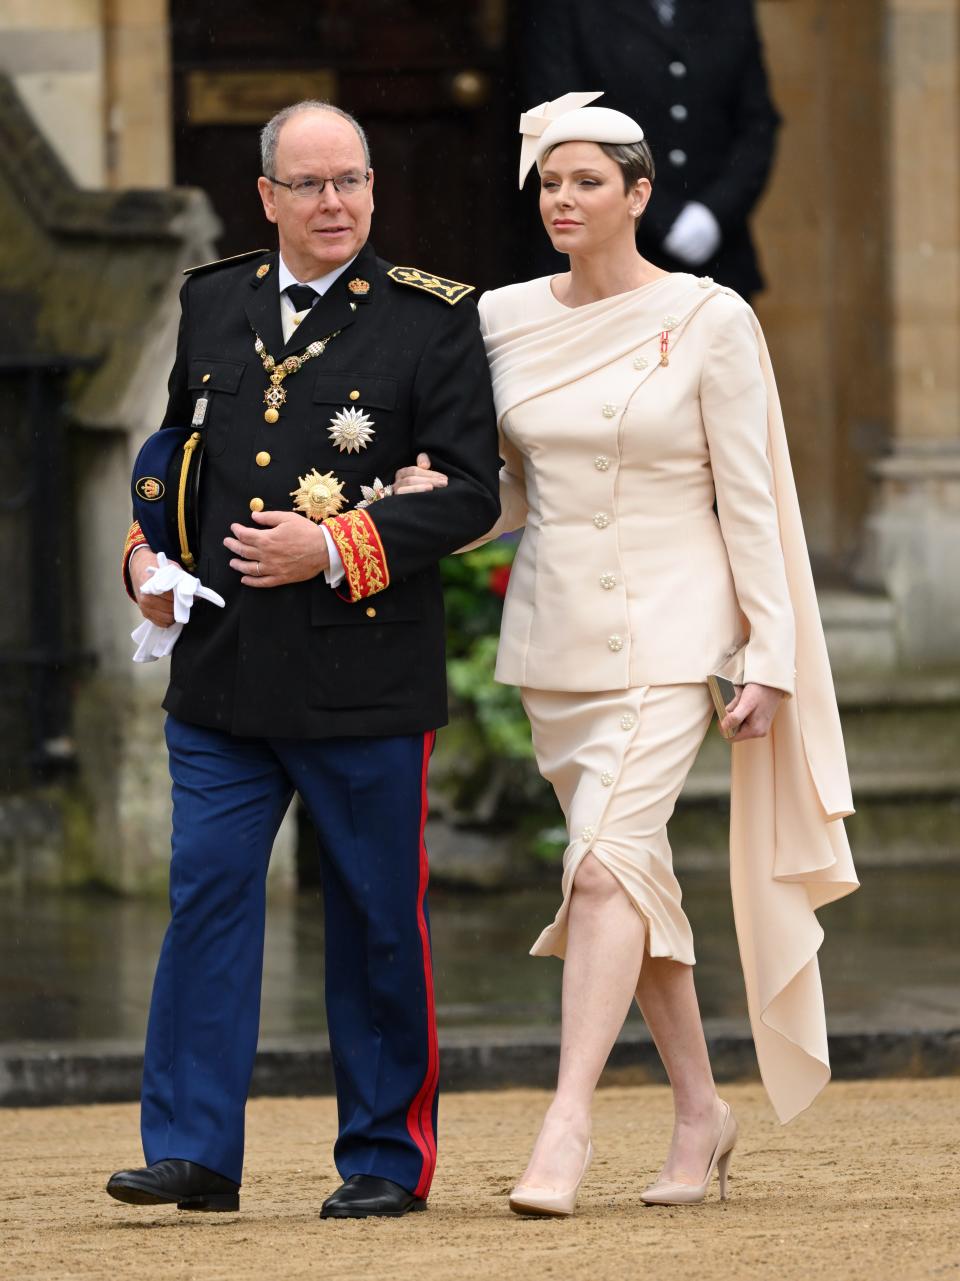 Prince Albert II and Princess Charlene of Monaco arrive at Westminster Abbey for the Coronation of King Charles III and Queen Camilla on May 06, 2023 in London, England.